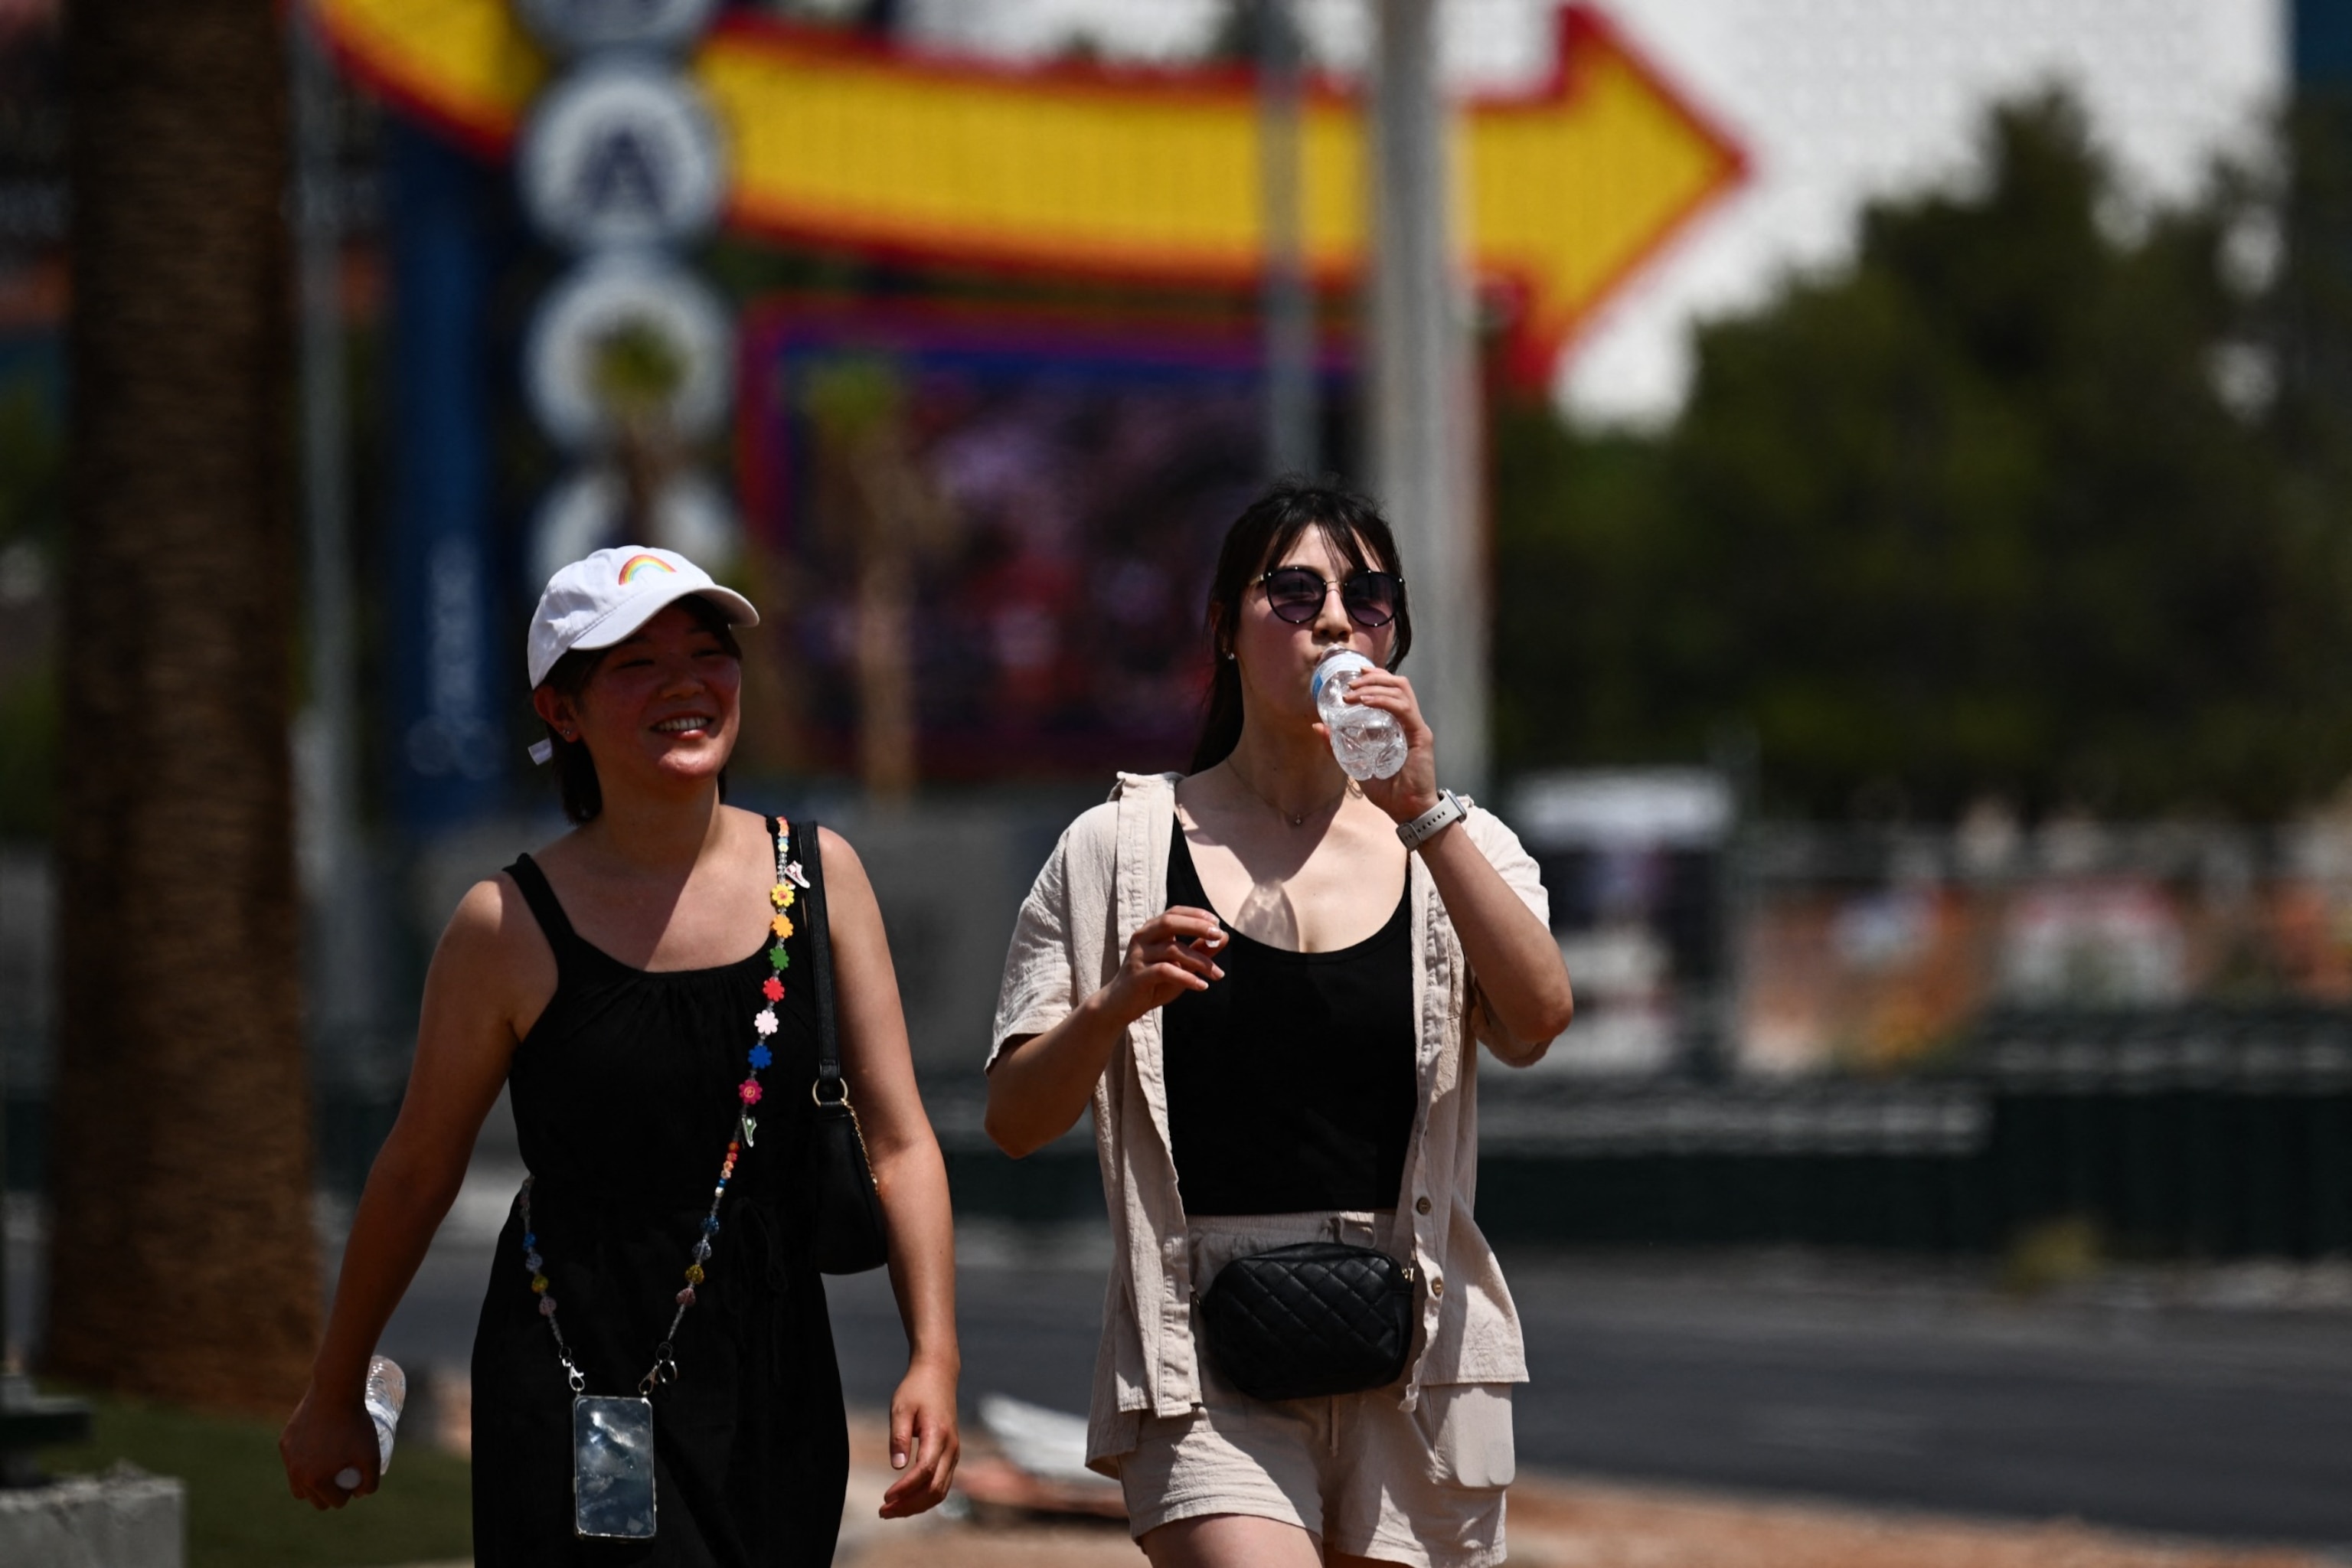 PHOTO: A person drinks a bottle of water while walking in the heat in Las Vegas, on July 30, 2023, as temperatures reach more than 100 degrees Fahrenheit (37.78C). 